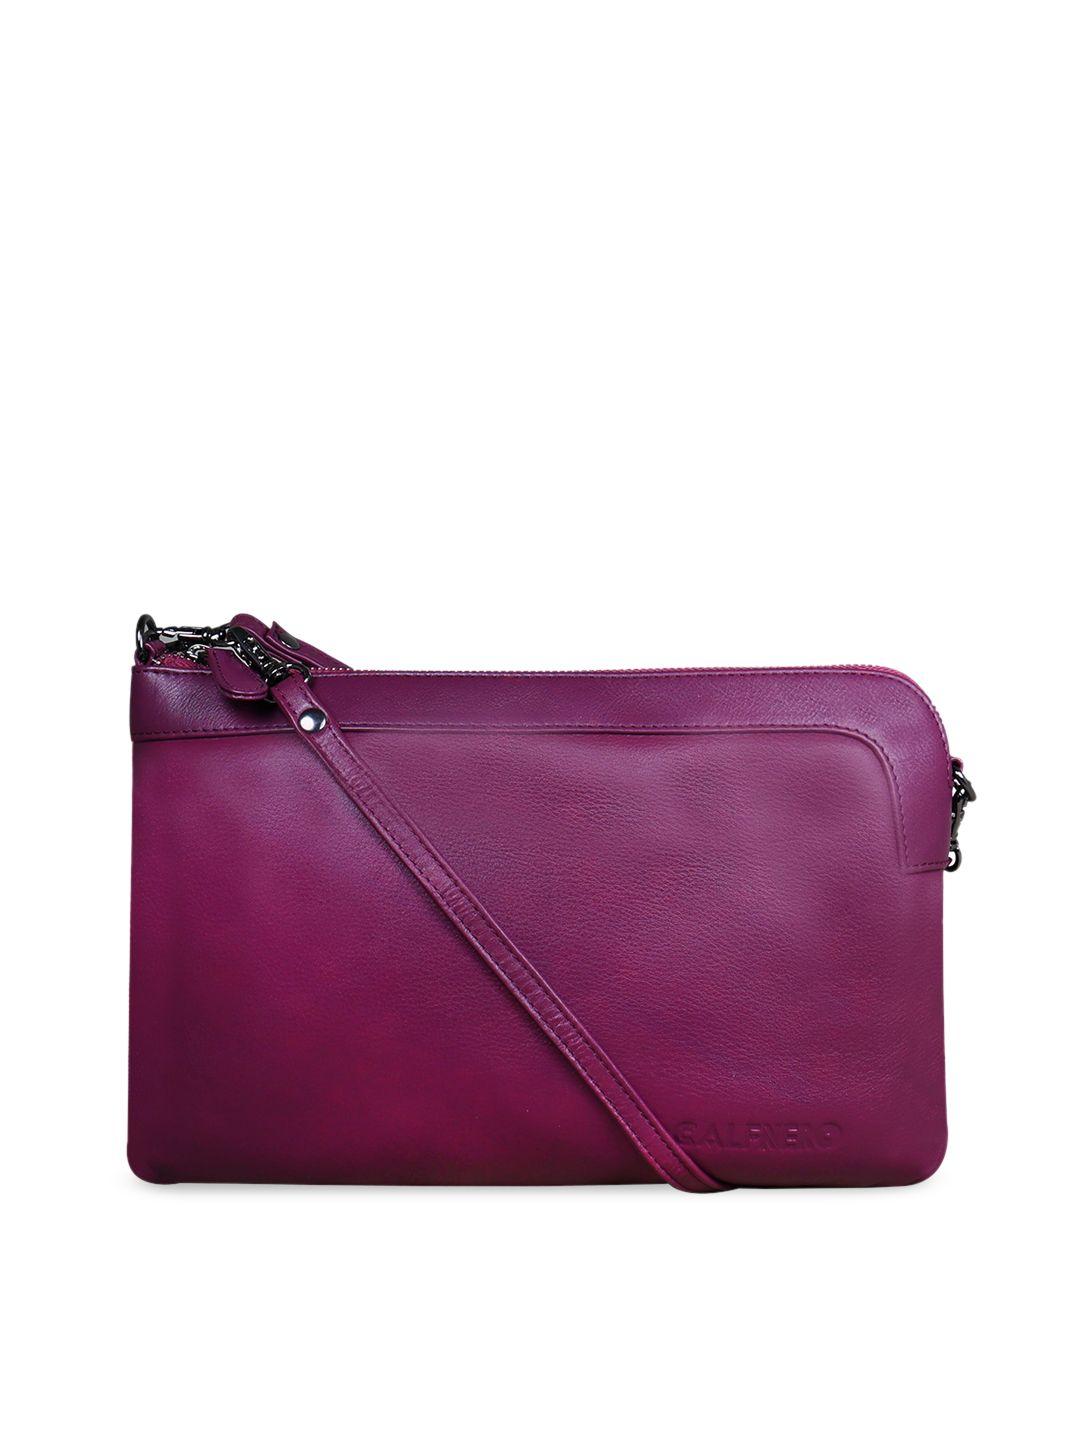 calfnero women purple leather structured sling bag